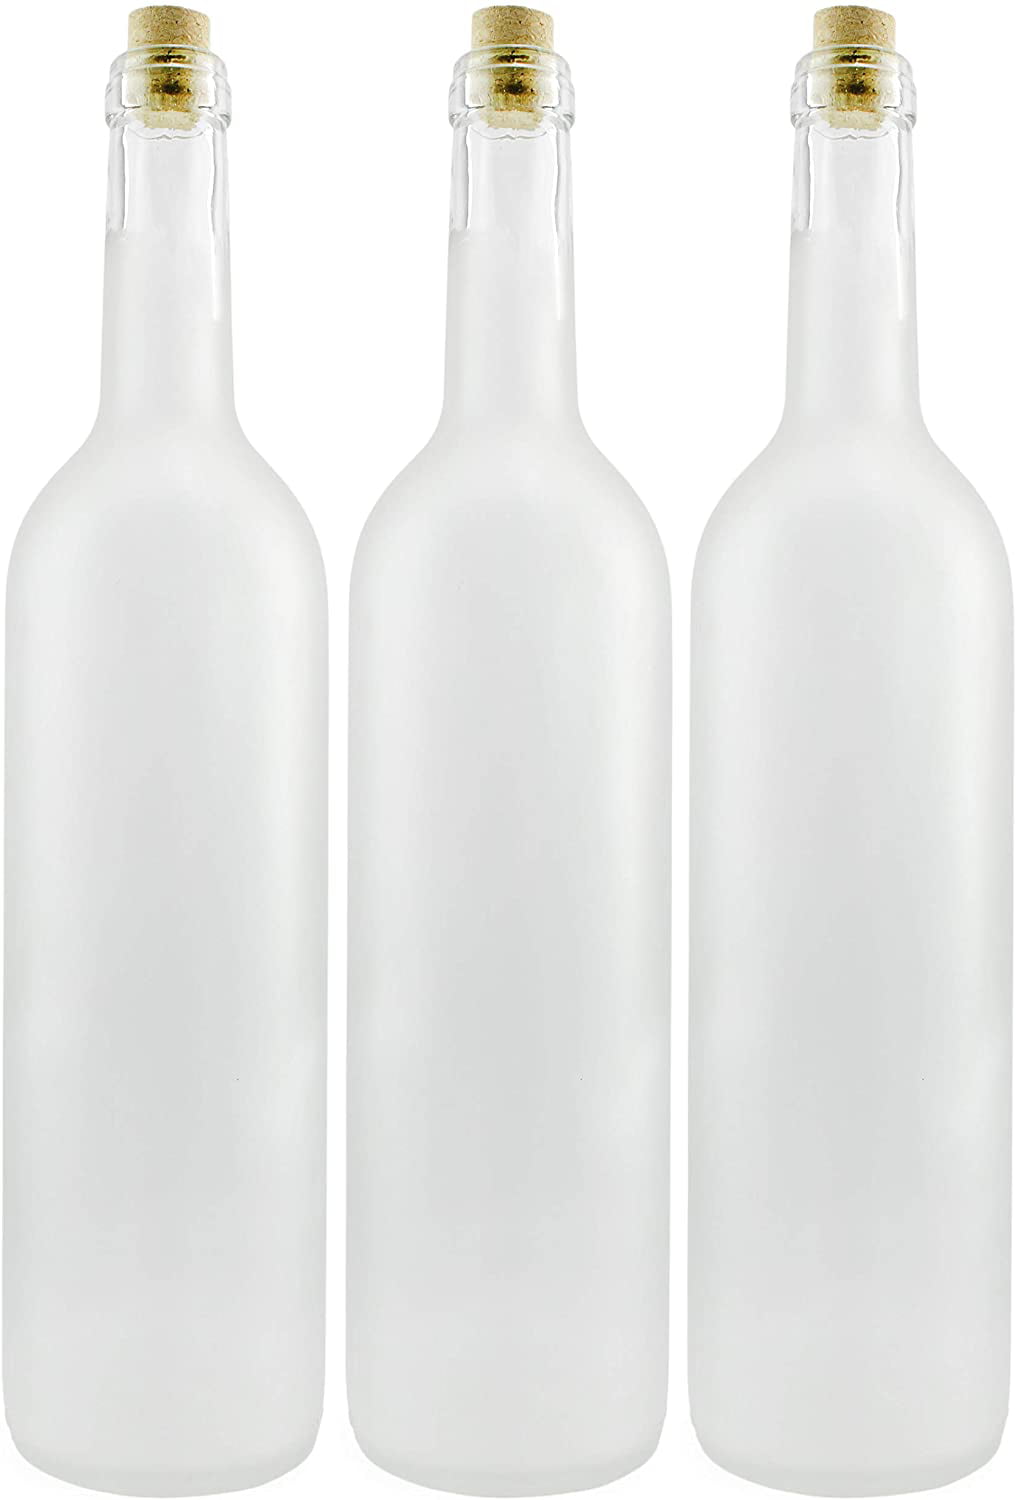 Cornucopia Frosted Wine Bottles w/Corks ; Wine Bottles with Corks for Decor and Bottling 3-Pack, White 